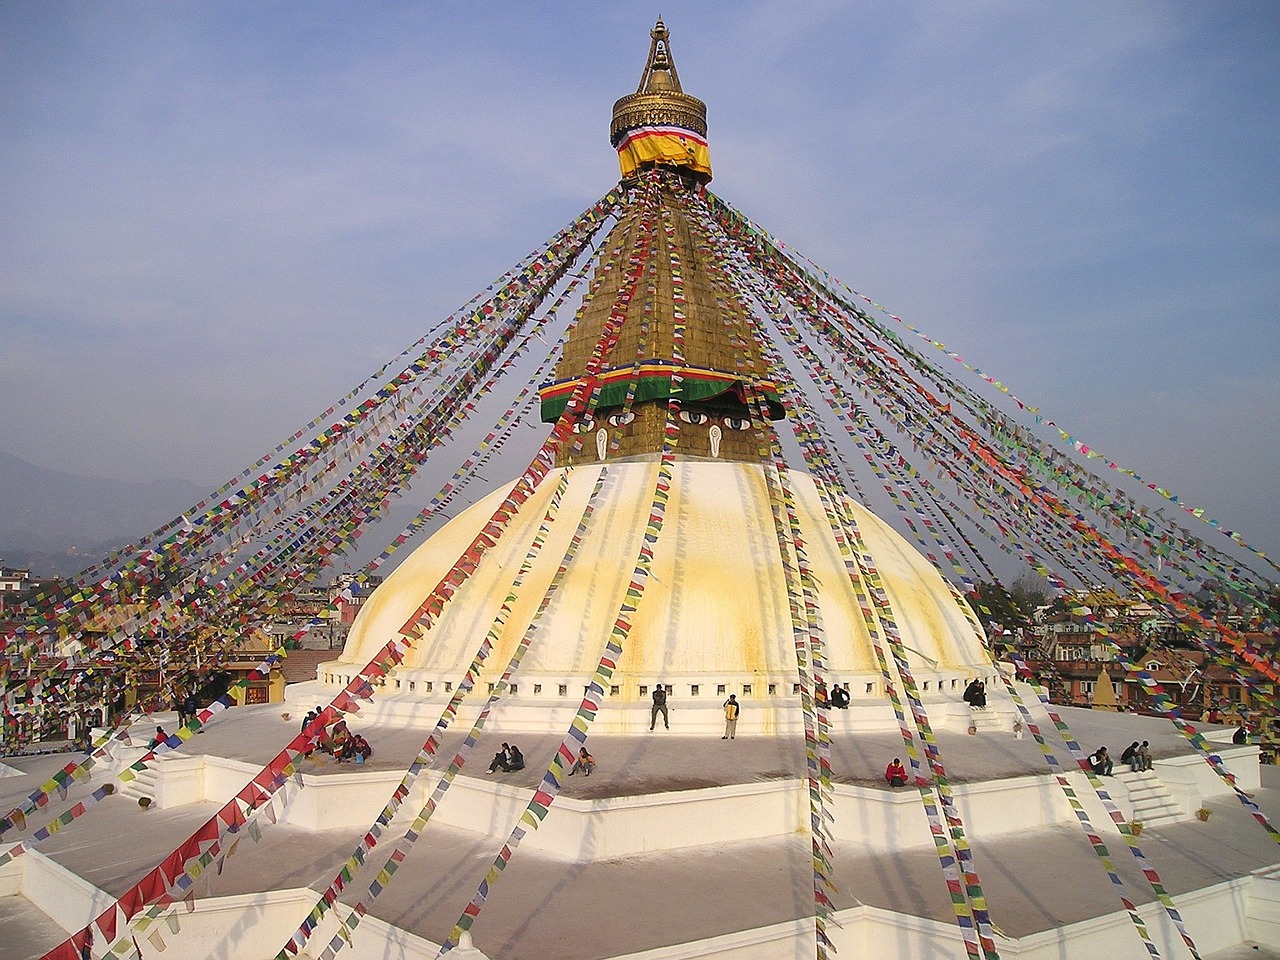 The Boudhanath Stupa is depicted in this iconic artwork with a backdrop of a blue sky, a large mandala, a white dome, and a golden spire topped with the all-seeing eyes of the Buddha.